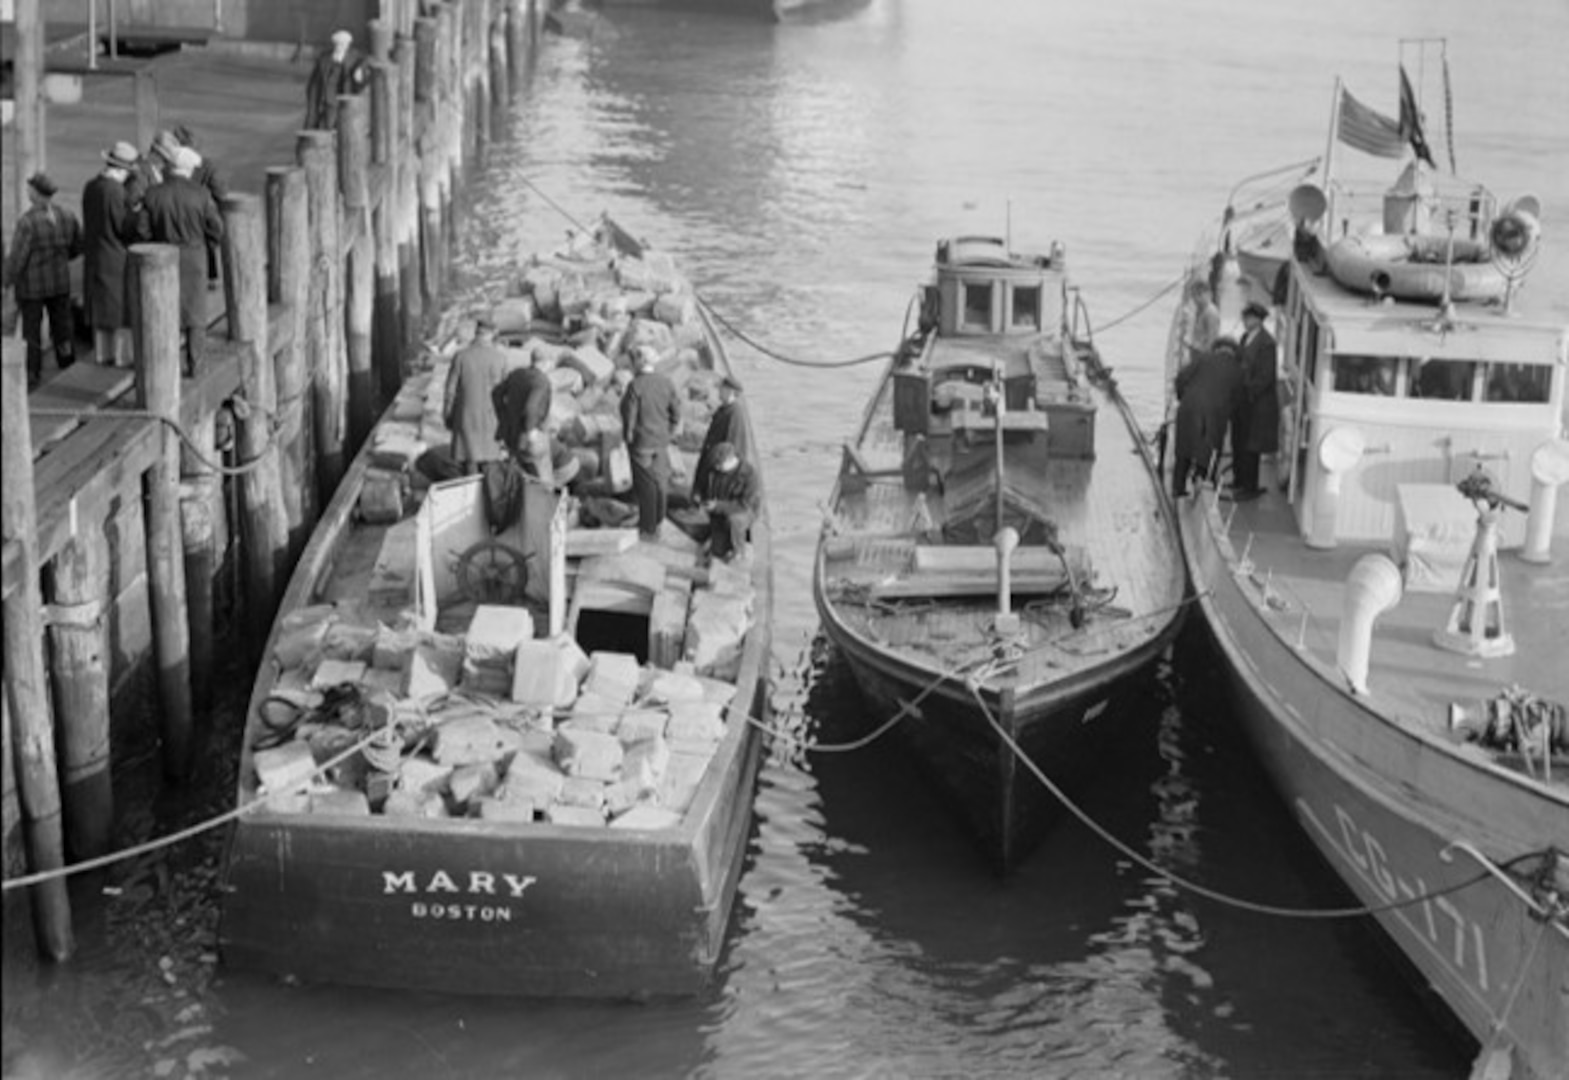 An apprehended rumrunner loaded with liquor shown with a Coast Guard 75-foot patrol boat on the docks in Boston. (Courtesy of Boston Public Library)